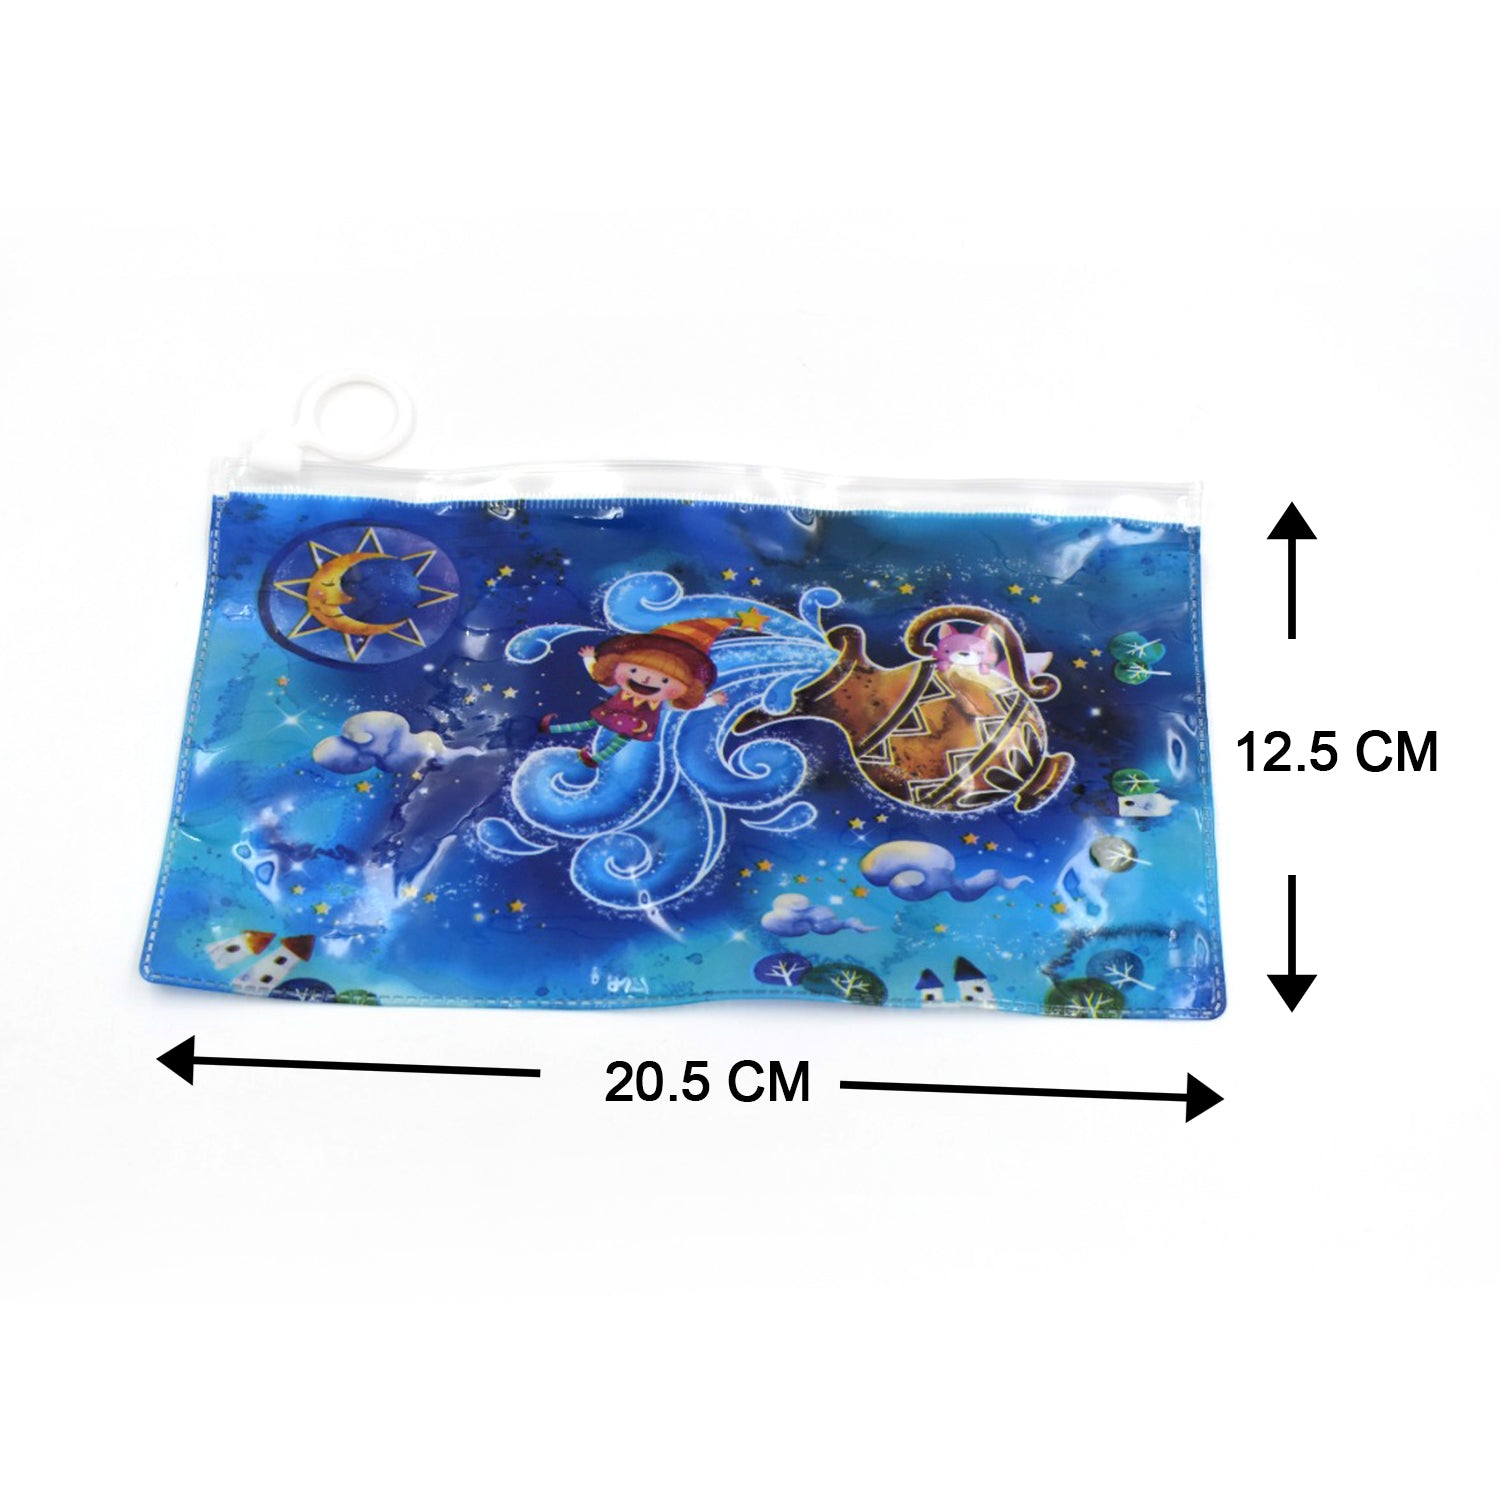 4843 20 Pc Blue Printed Pouch For Carrying Stationary Stuffs And All By The Students.